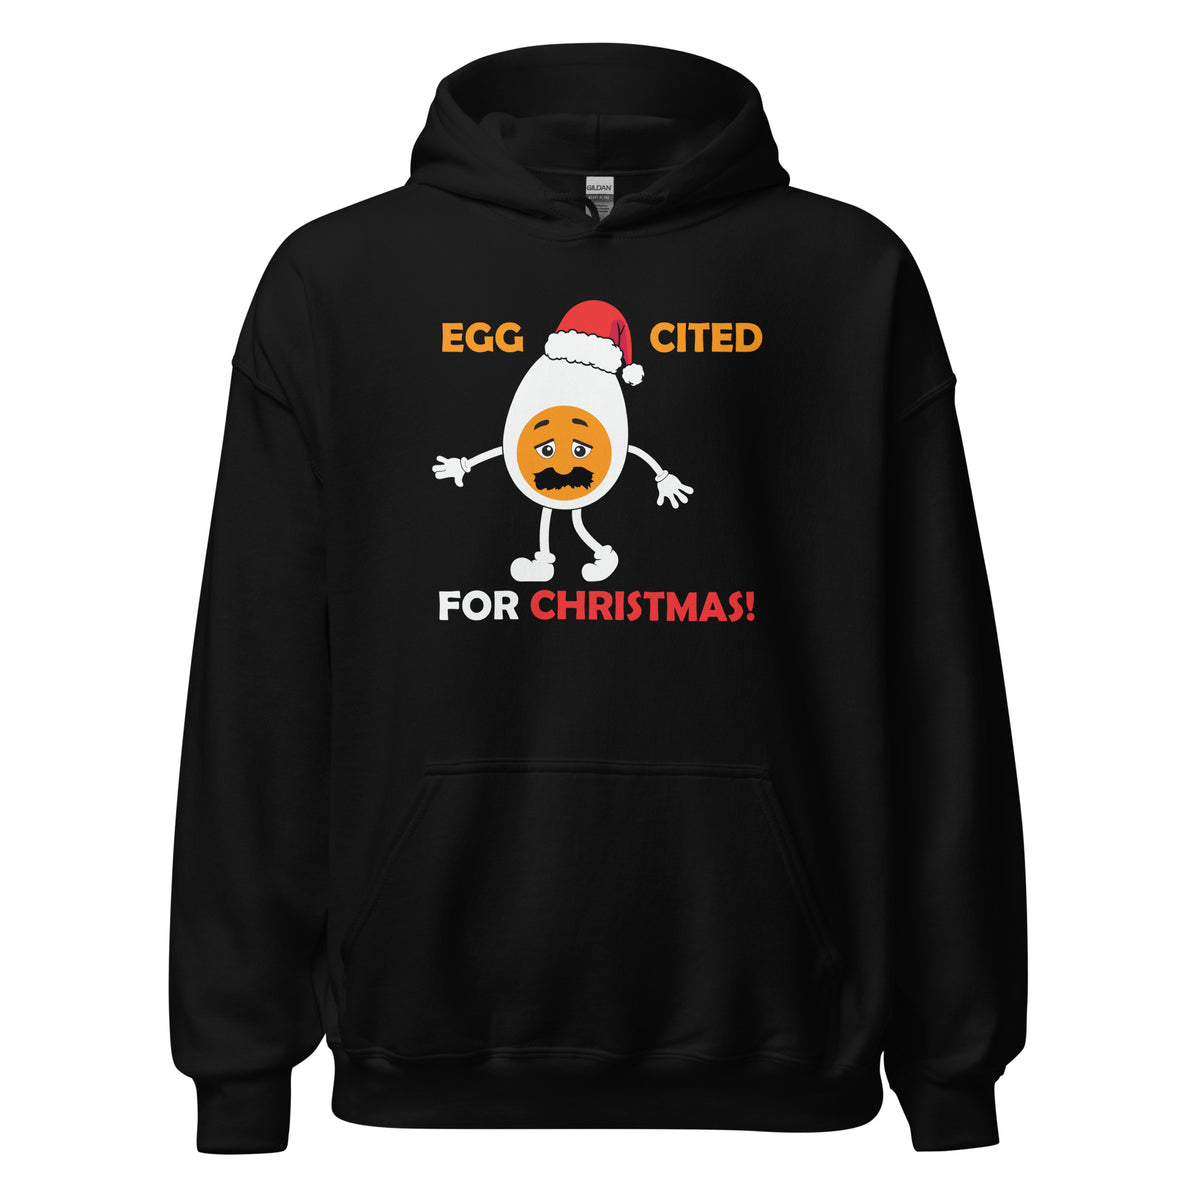 Egg-cited For Christmas Hoodie